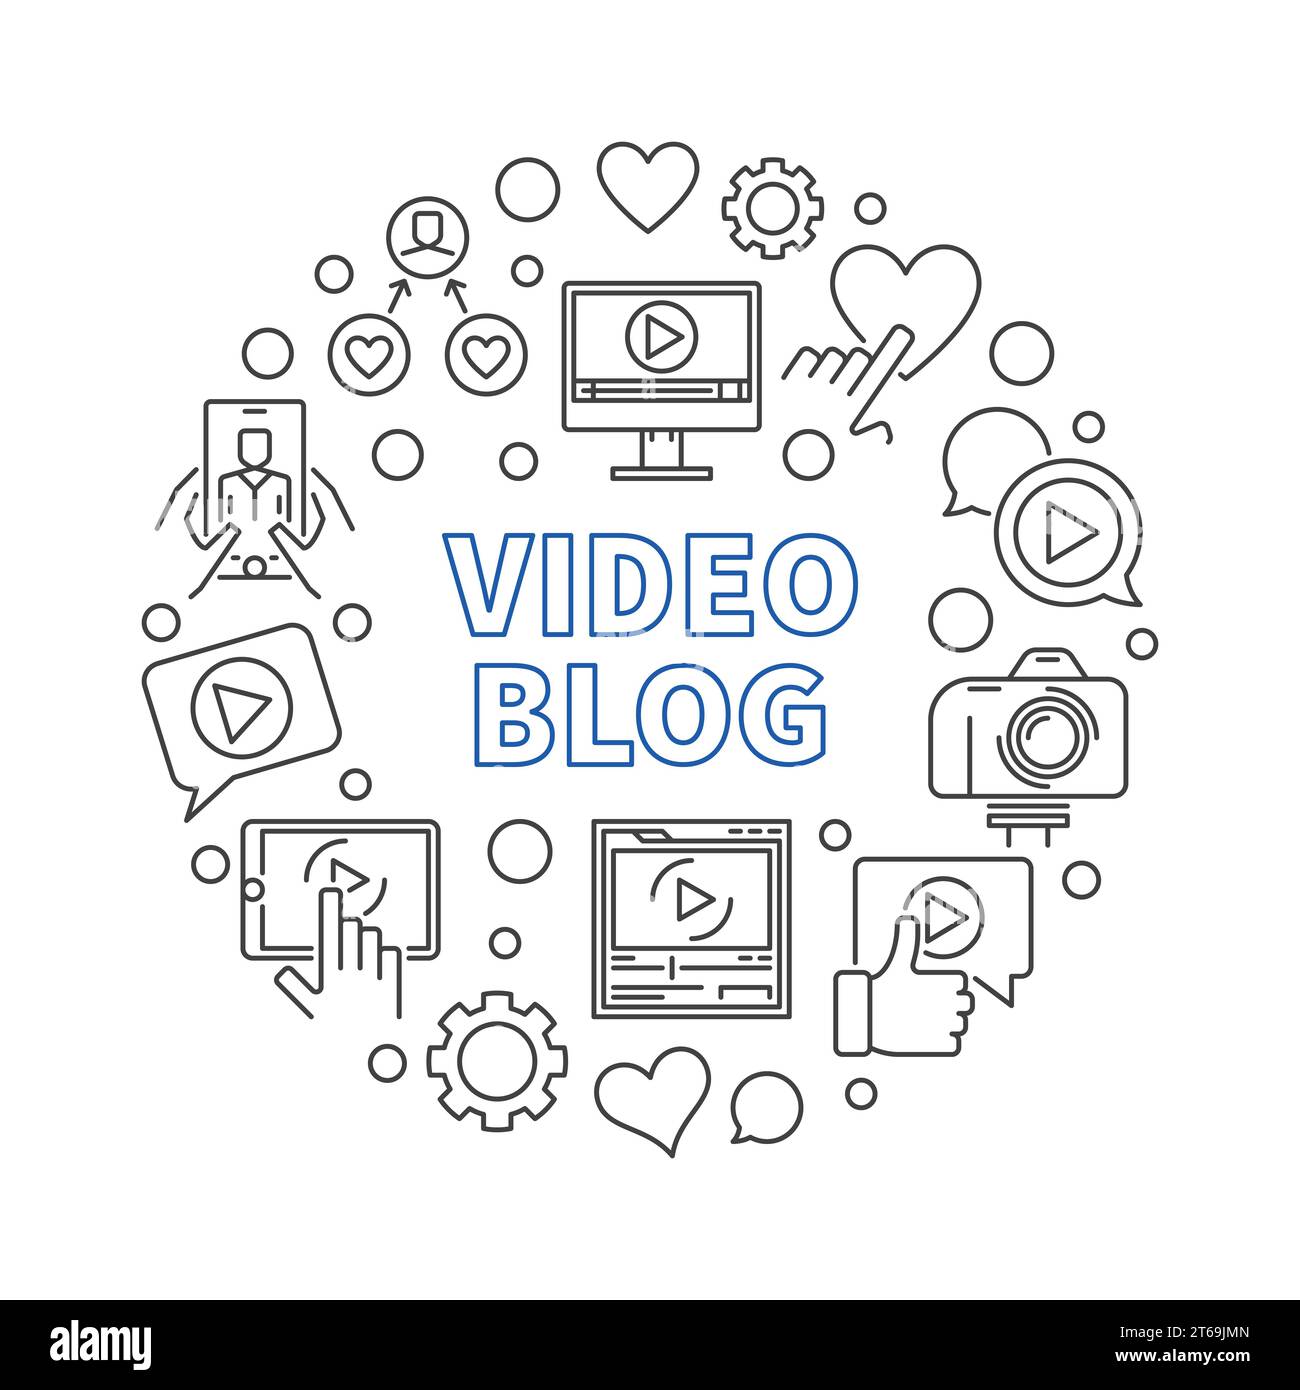 Video Blog vector round concept illustration in thin line style Stock Vector